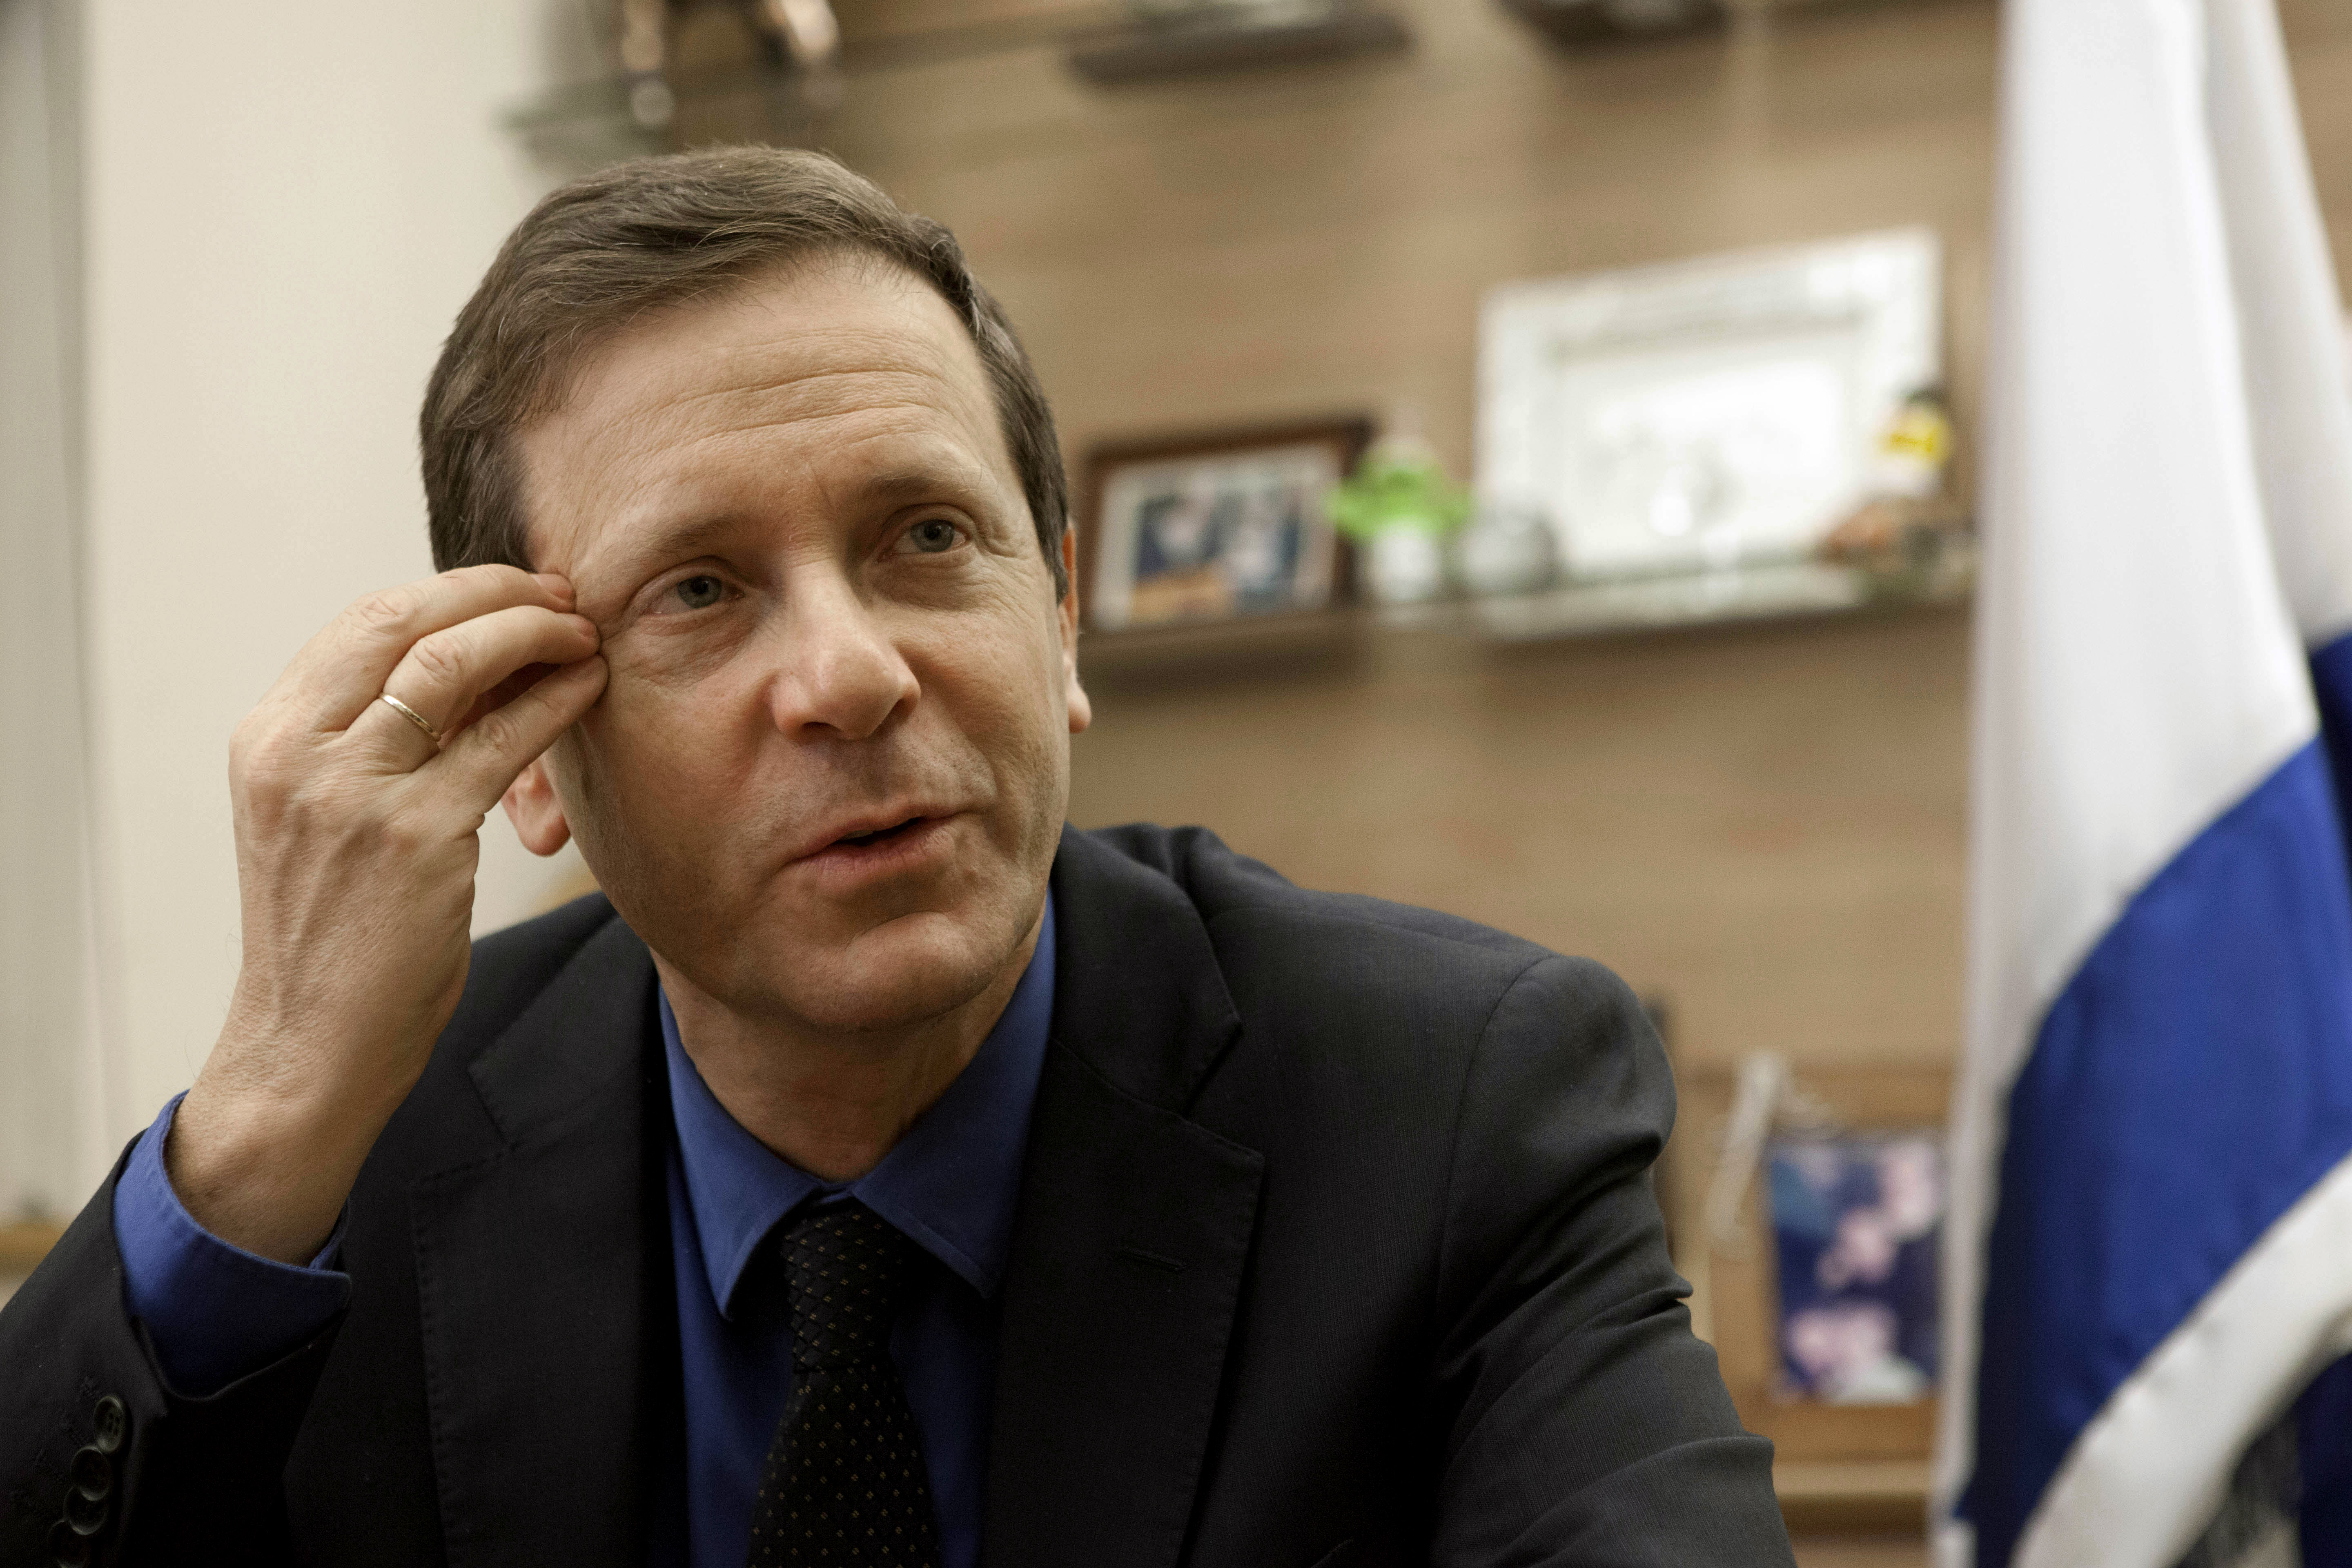 Isaac Herzog, a newly elected leader of the Labor Party gestures during an interview in his office in Jerusalem, Wednesday, Dec. 11, 2013. Herzog said Wednesday that Benjamin Netanyahus views on a peace deal with the Palestinians remain an enigma, and that hes not sure the Israeli prime minister has the "mental willingness'' to do what is needed. (AP Photo/Dan Balilty)